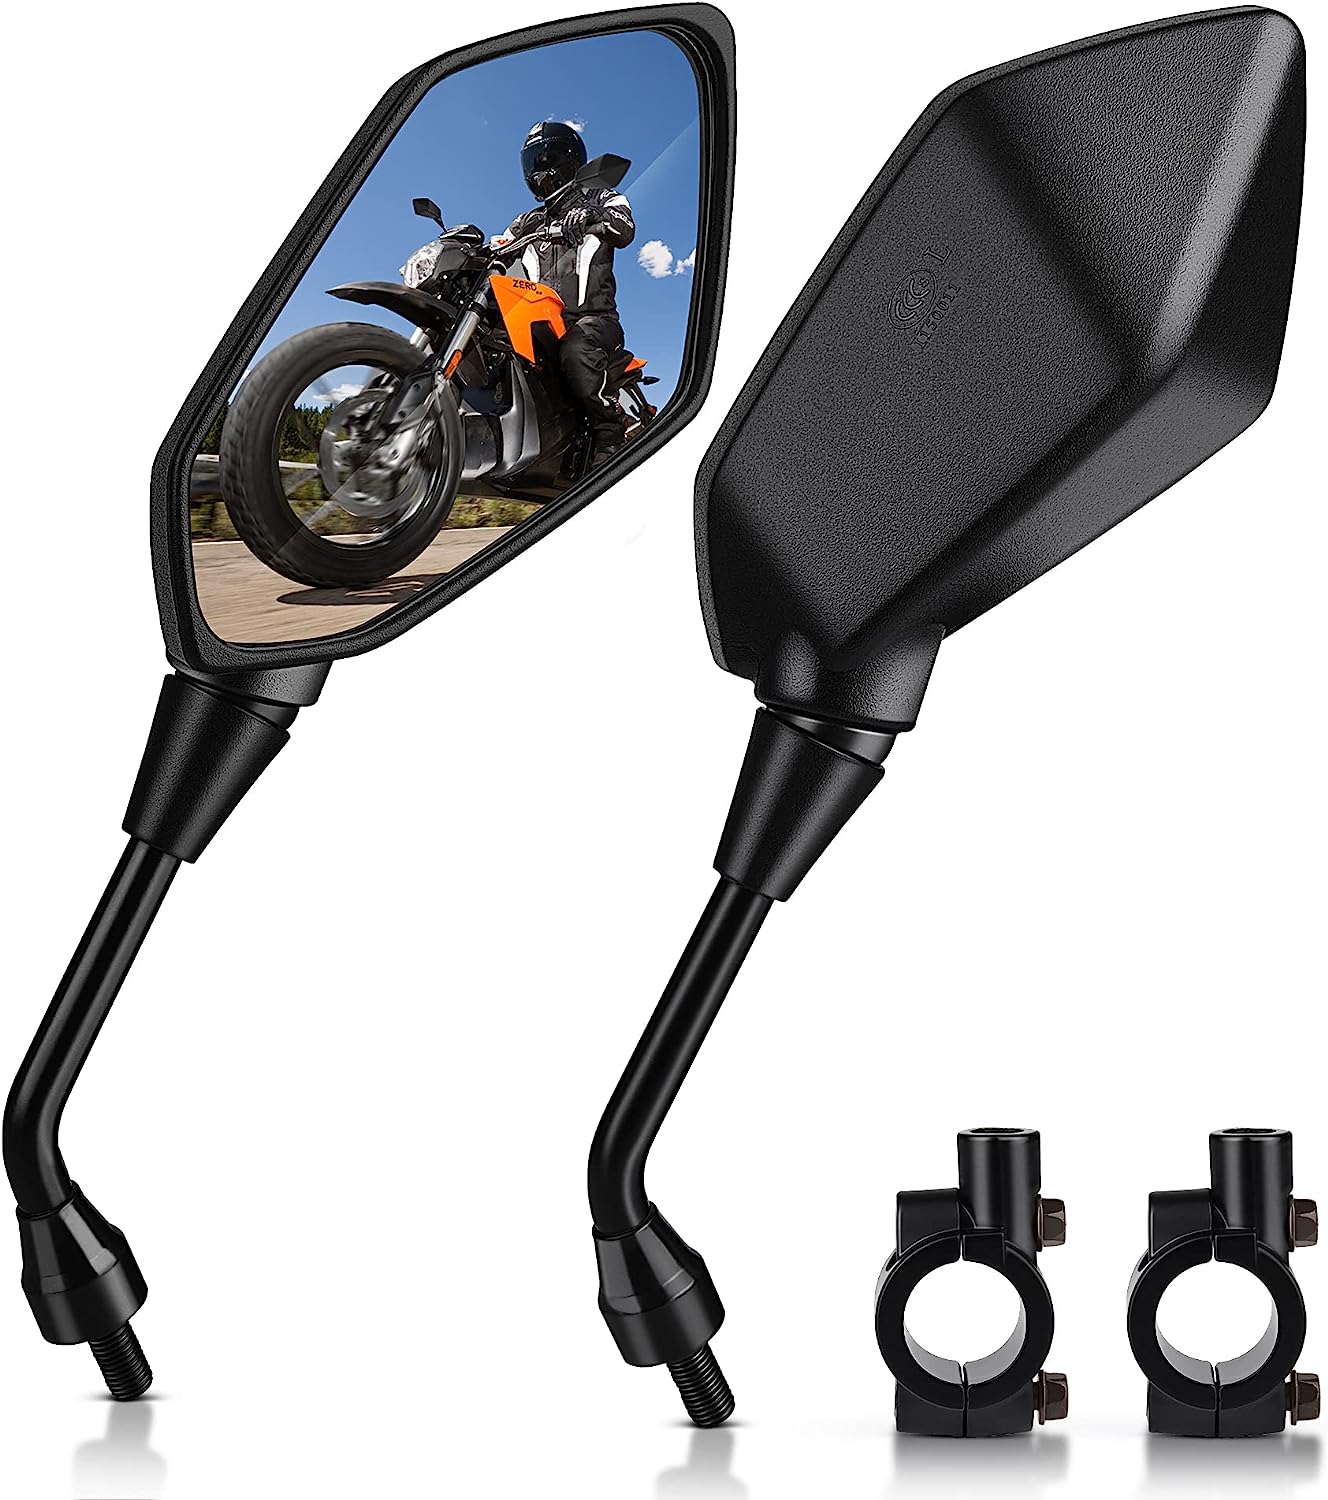 Motorcycle Convex Rear View Mirror - with 10mm Bolt, Handle Bar Mount Clamp